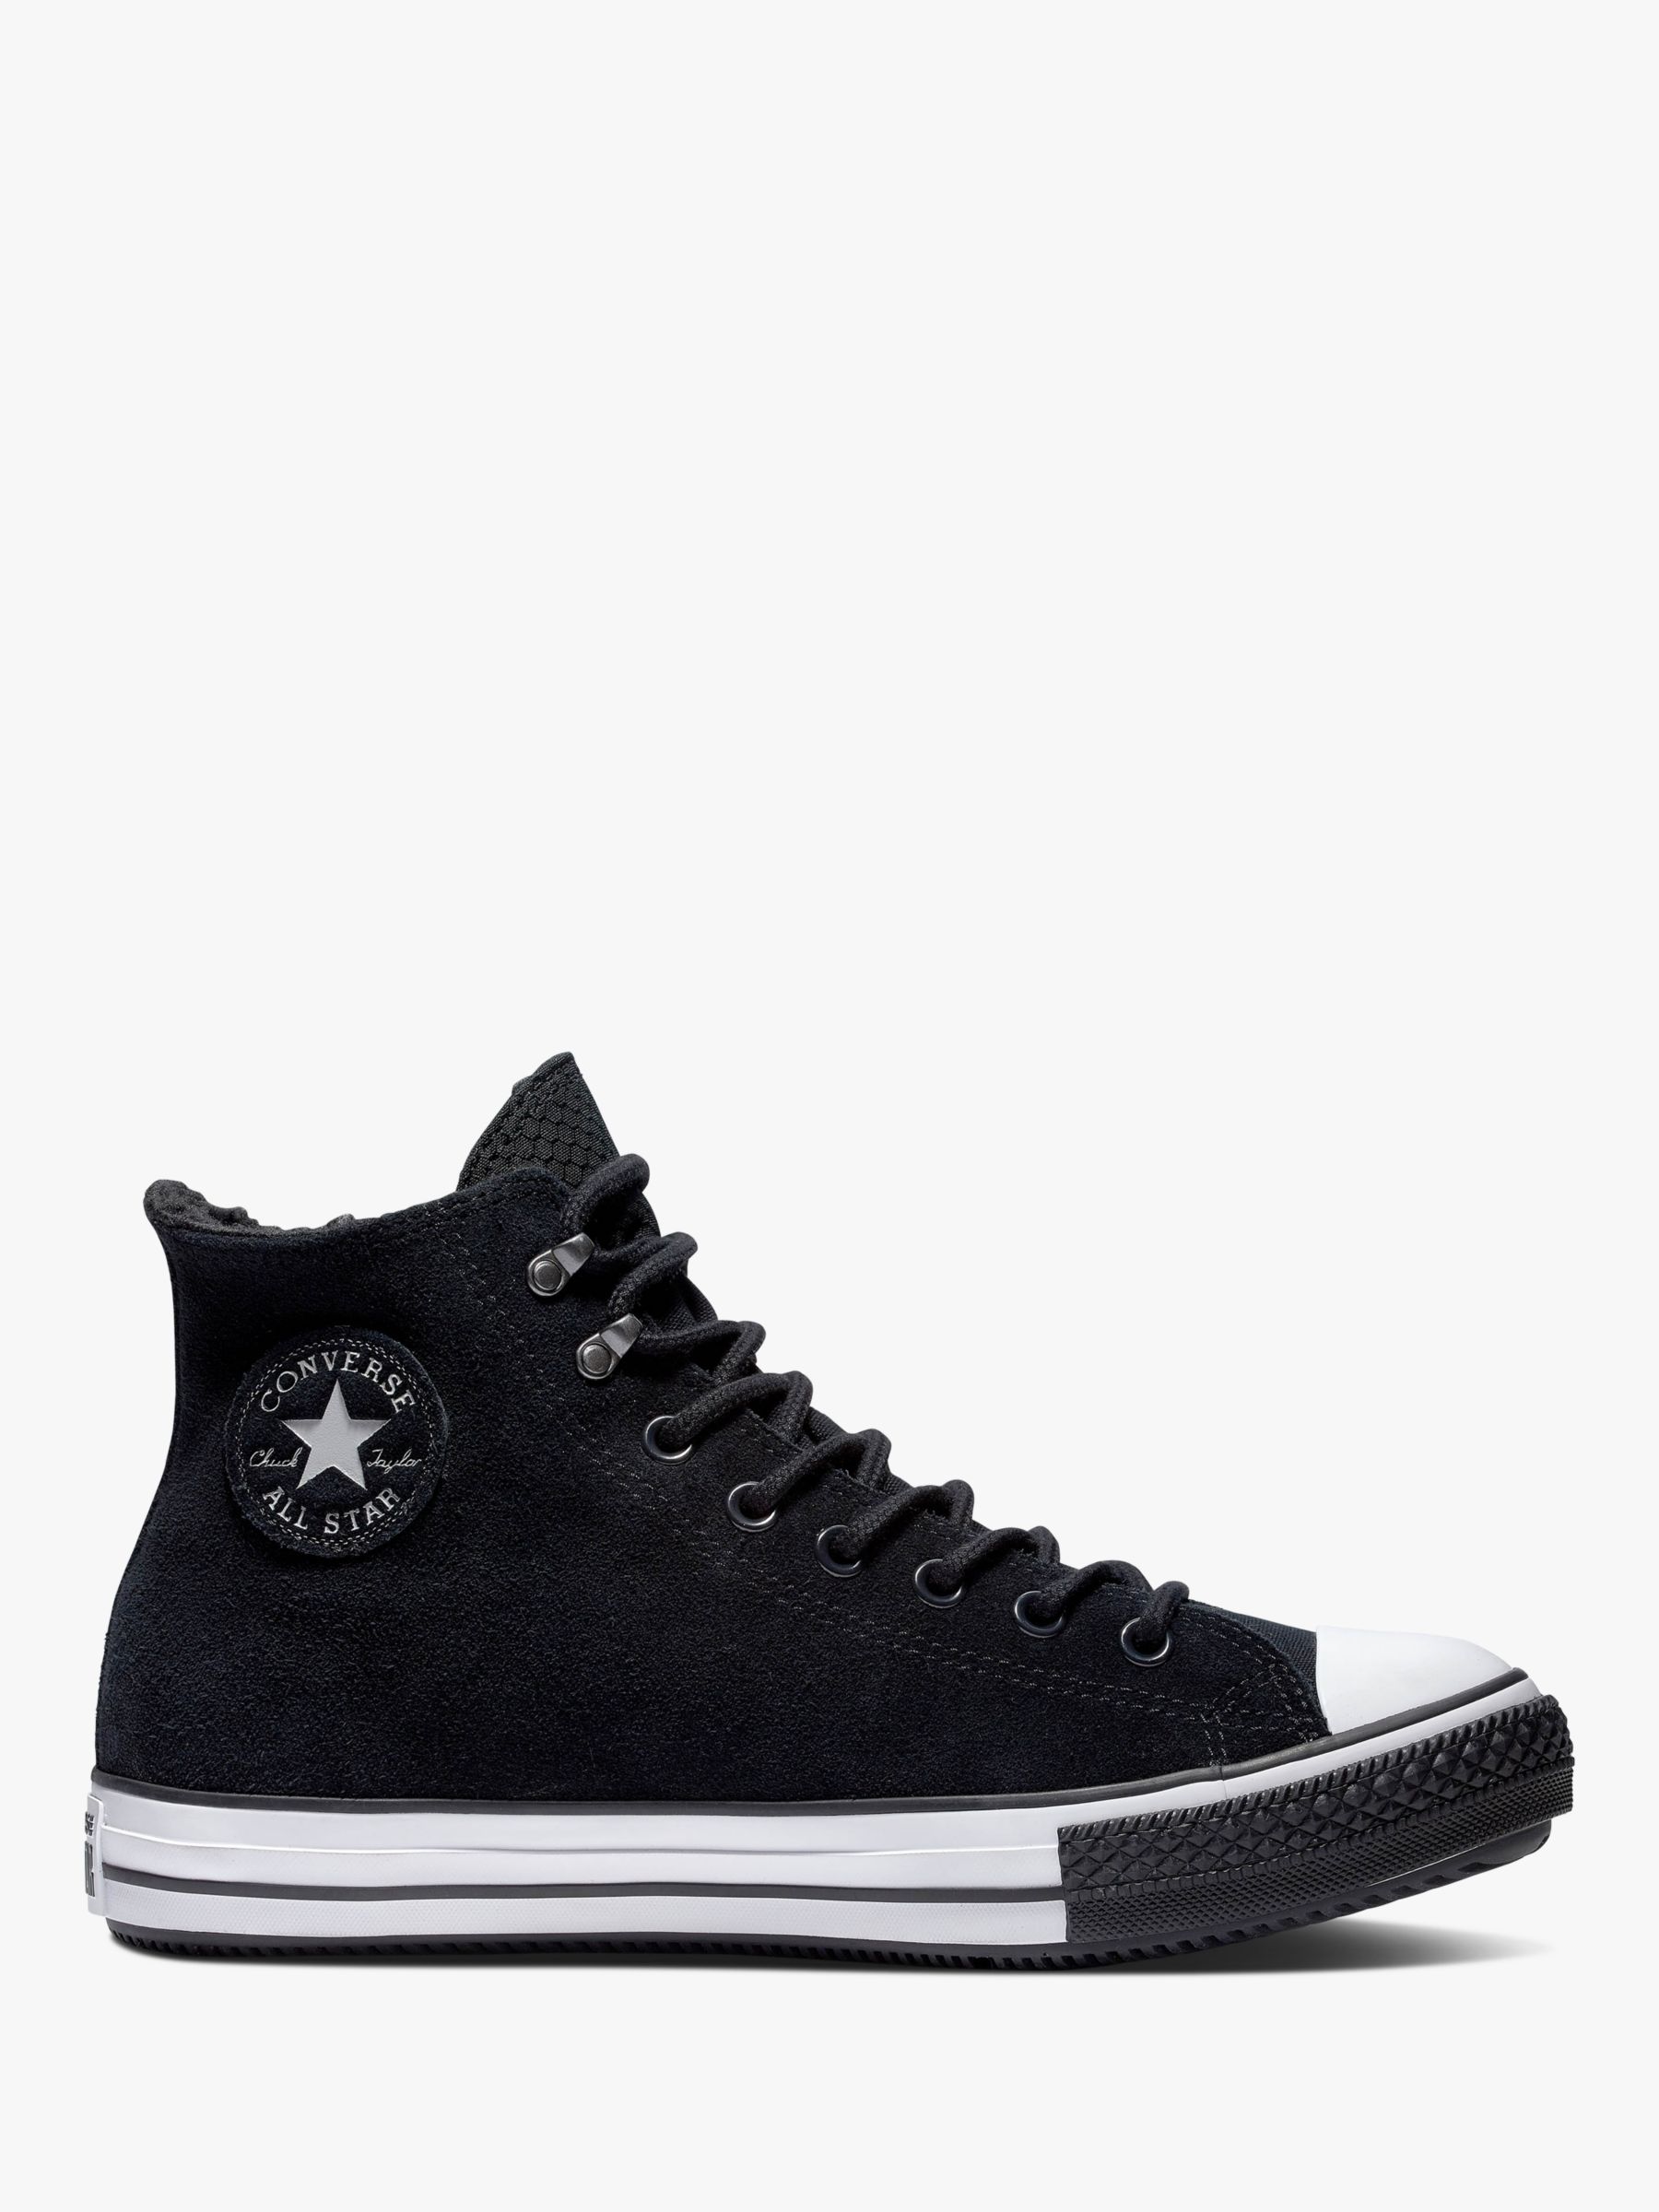 converse all star suede high tops